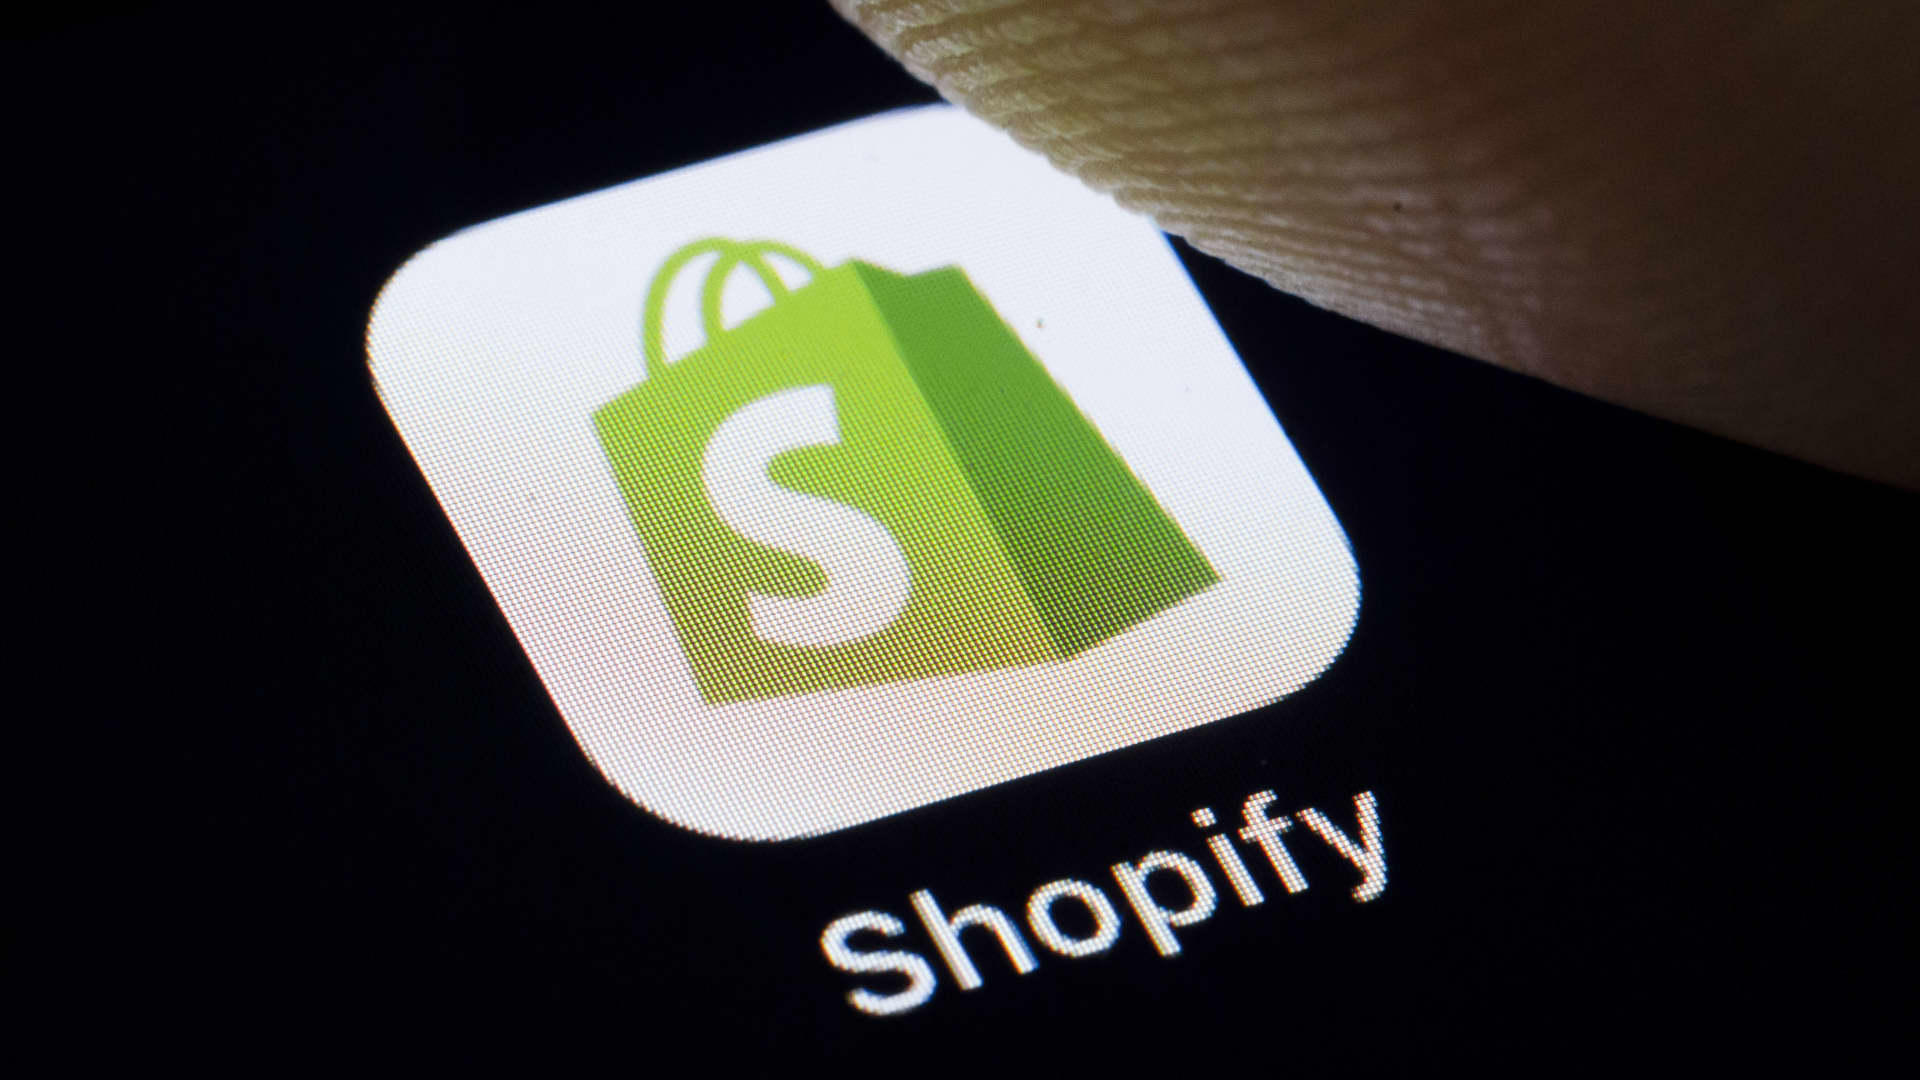 Shopify misses estimates and issues gloomy guidance